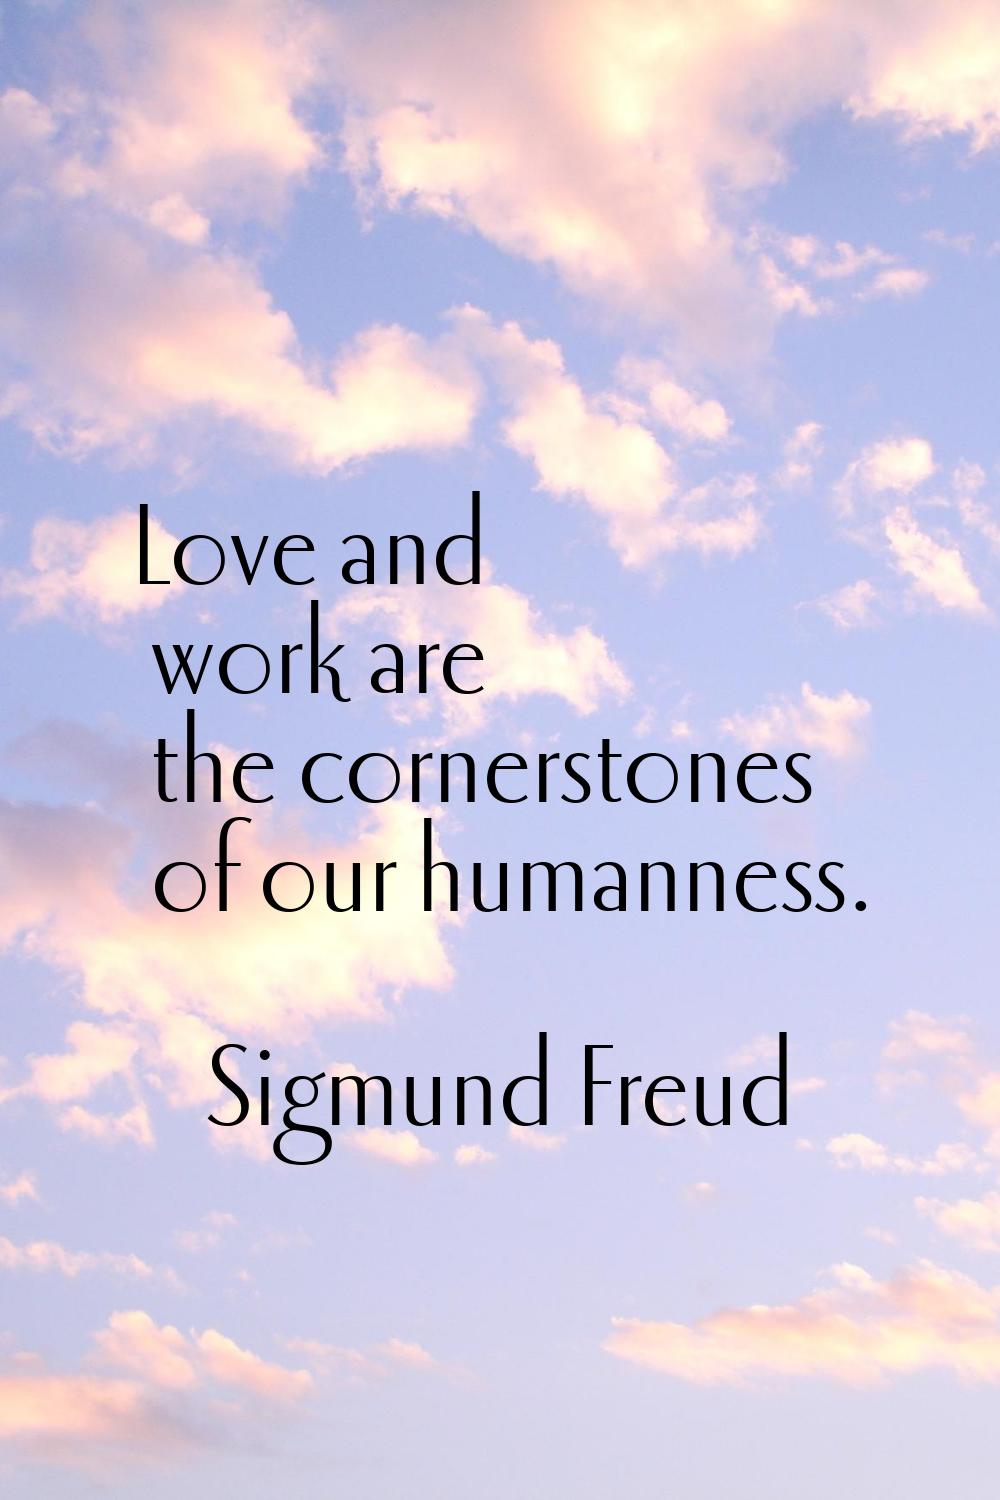 Love and work are the cornerstones of our humanness.